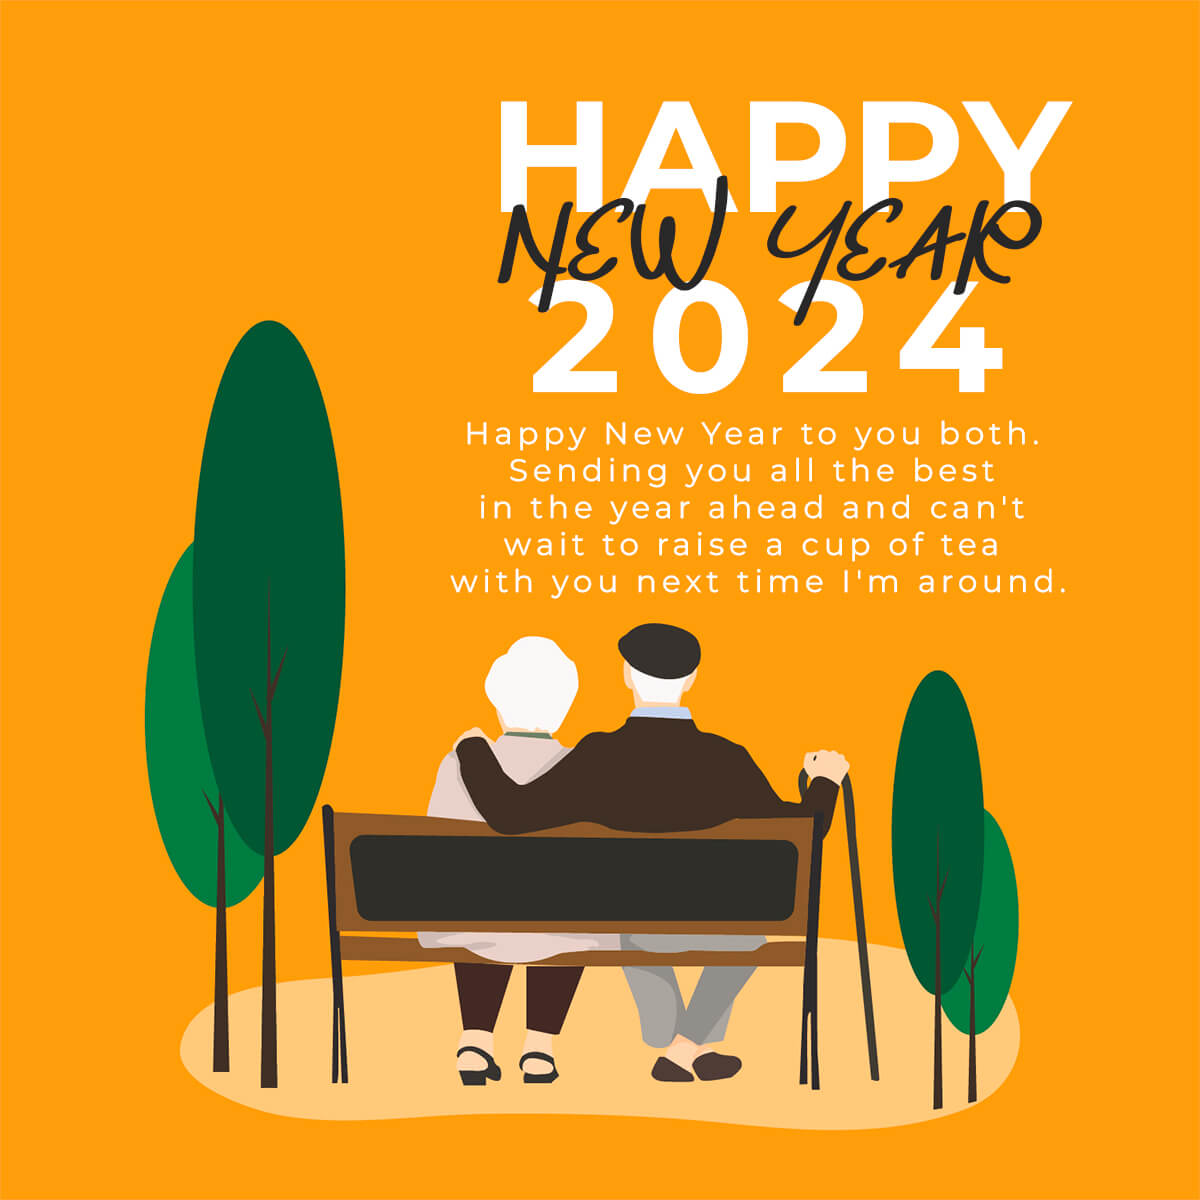 Happy New Year 2024 Wishes For Seniors